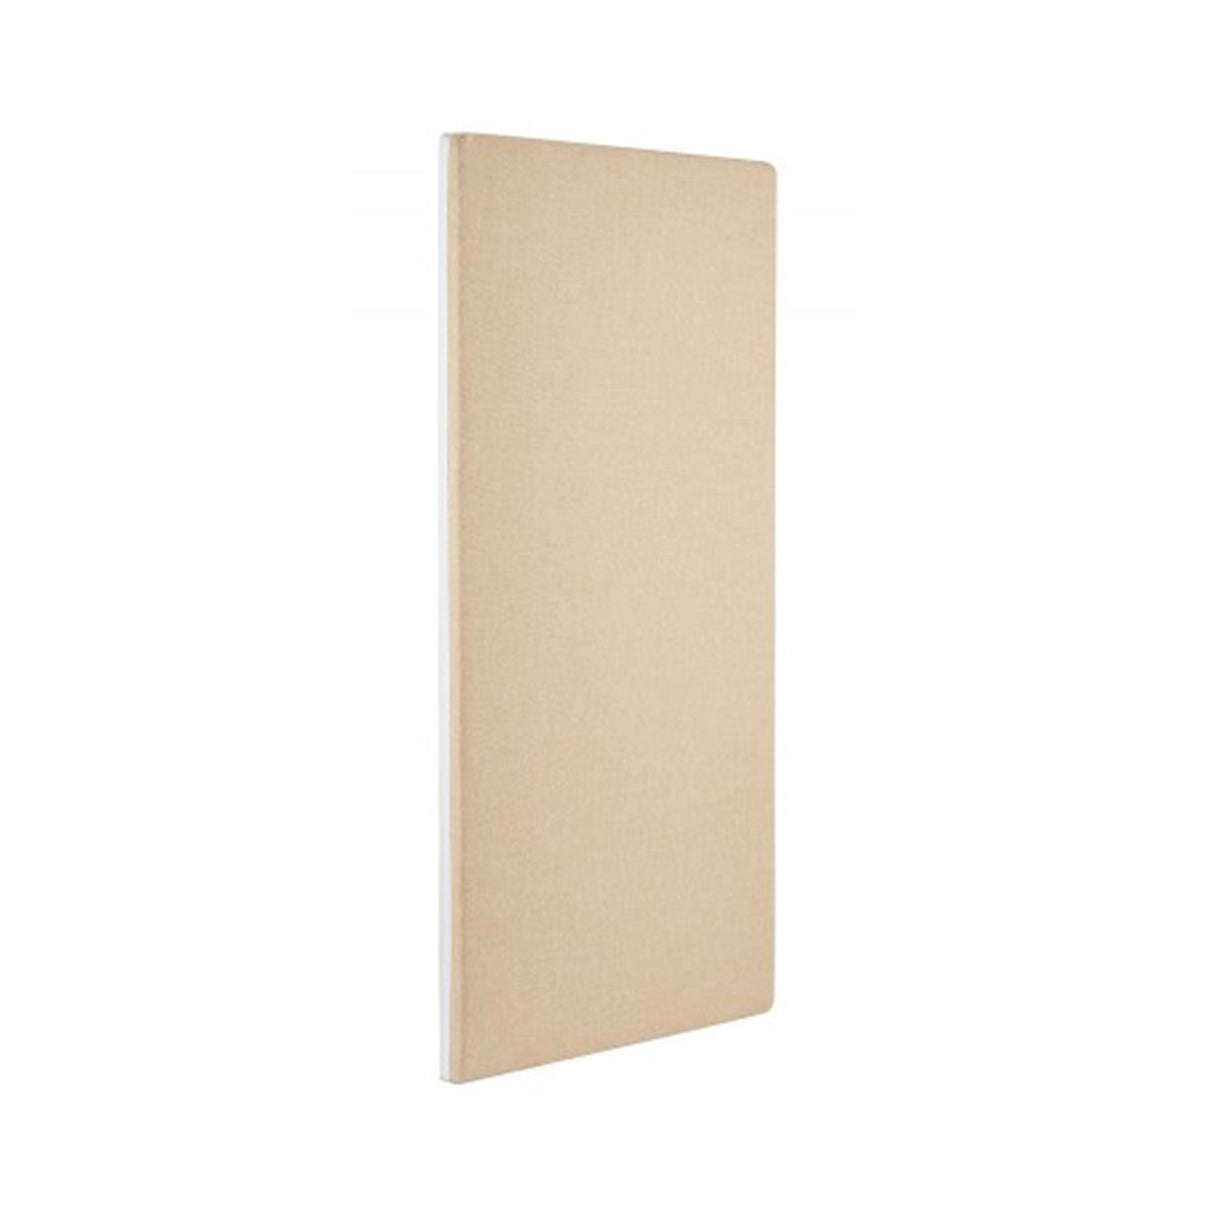 GeerFab MultiZorber OC703DR 24 x 48 Inch Acoustic Panel, Flannel